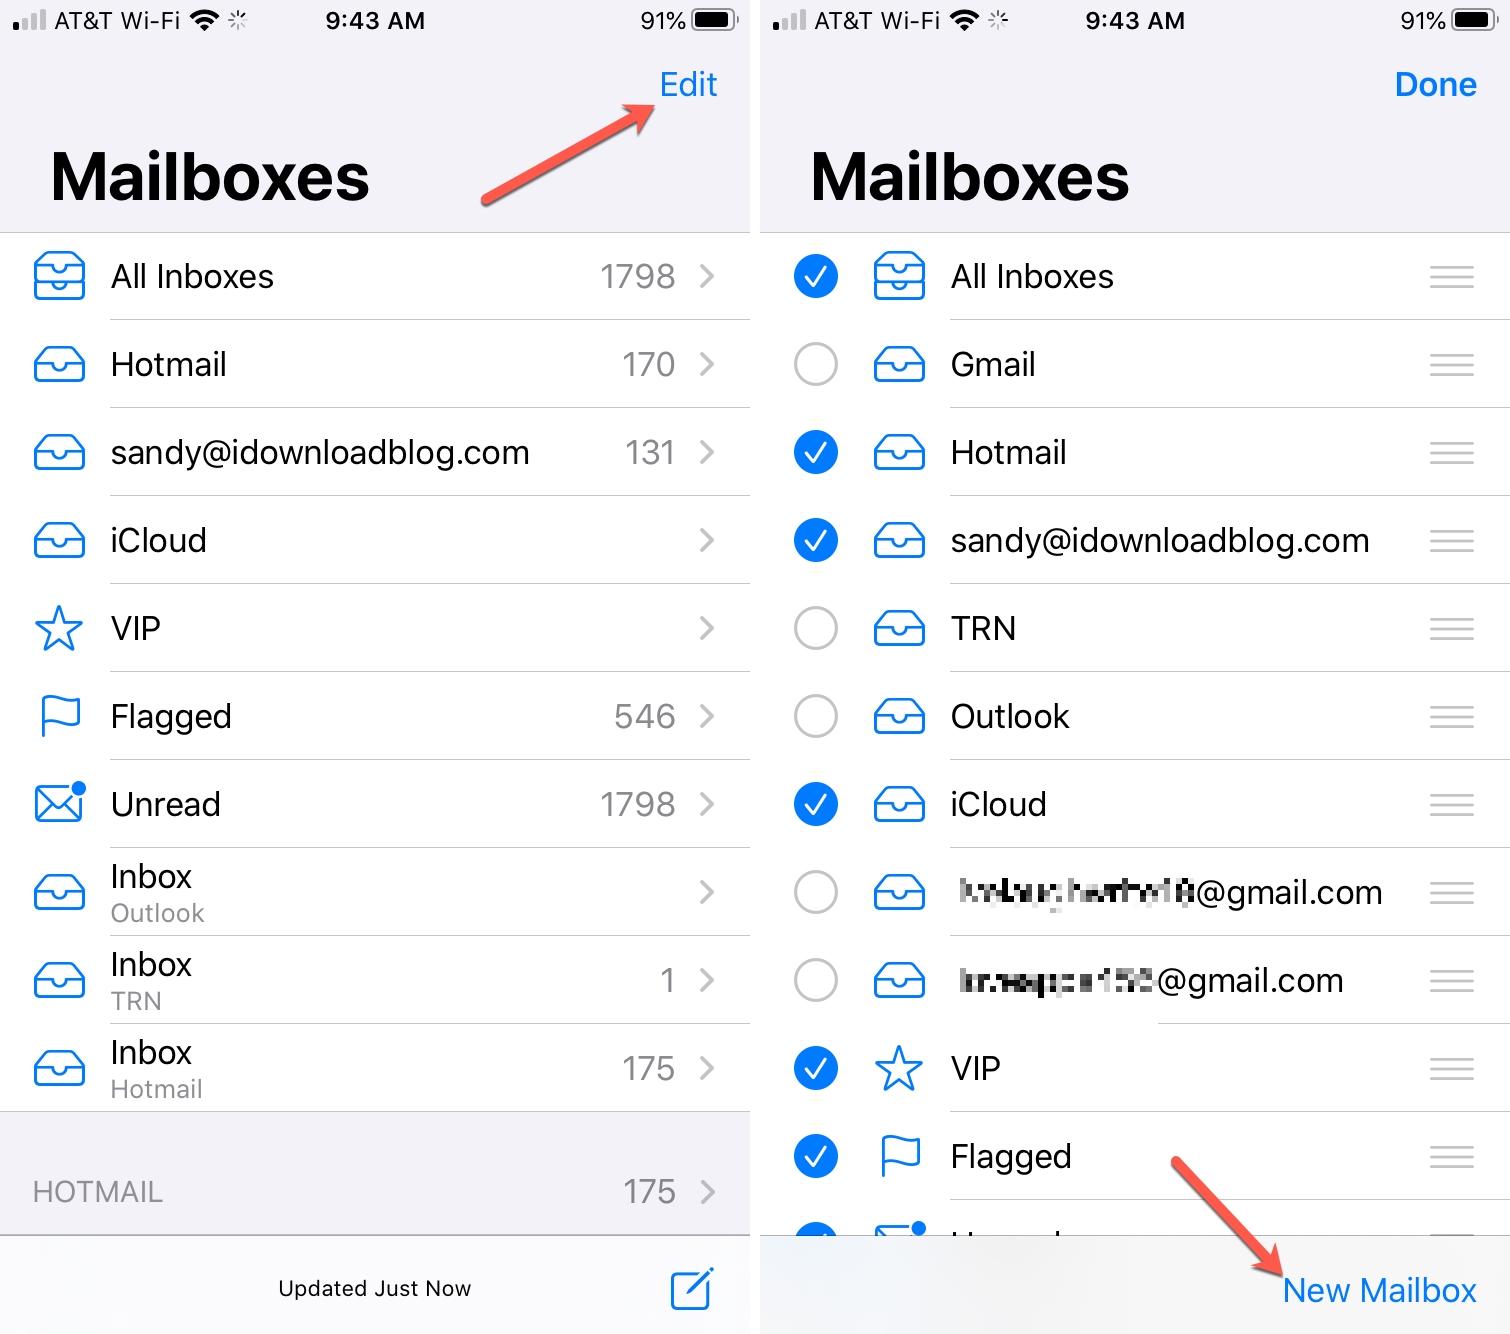 How To Add Or Remove Additional Smart Inbox Folders In IOS Mail